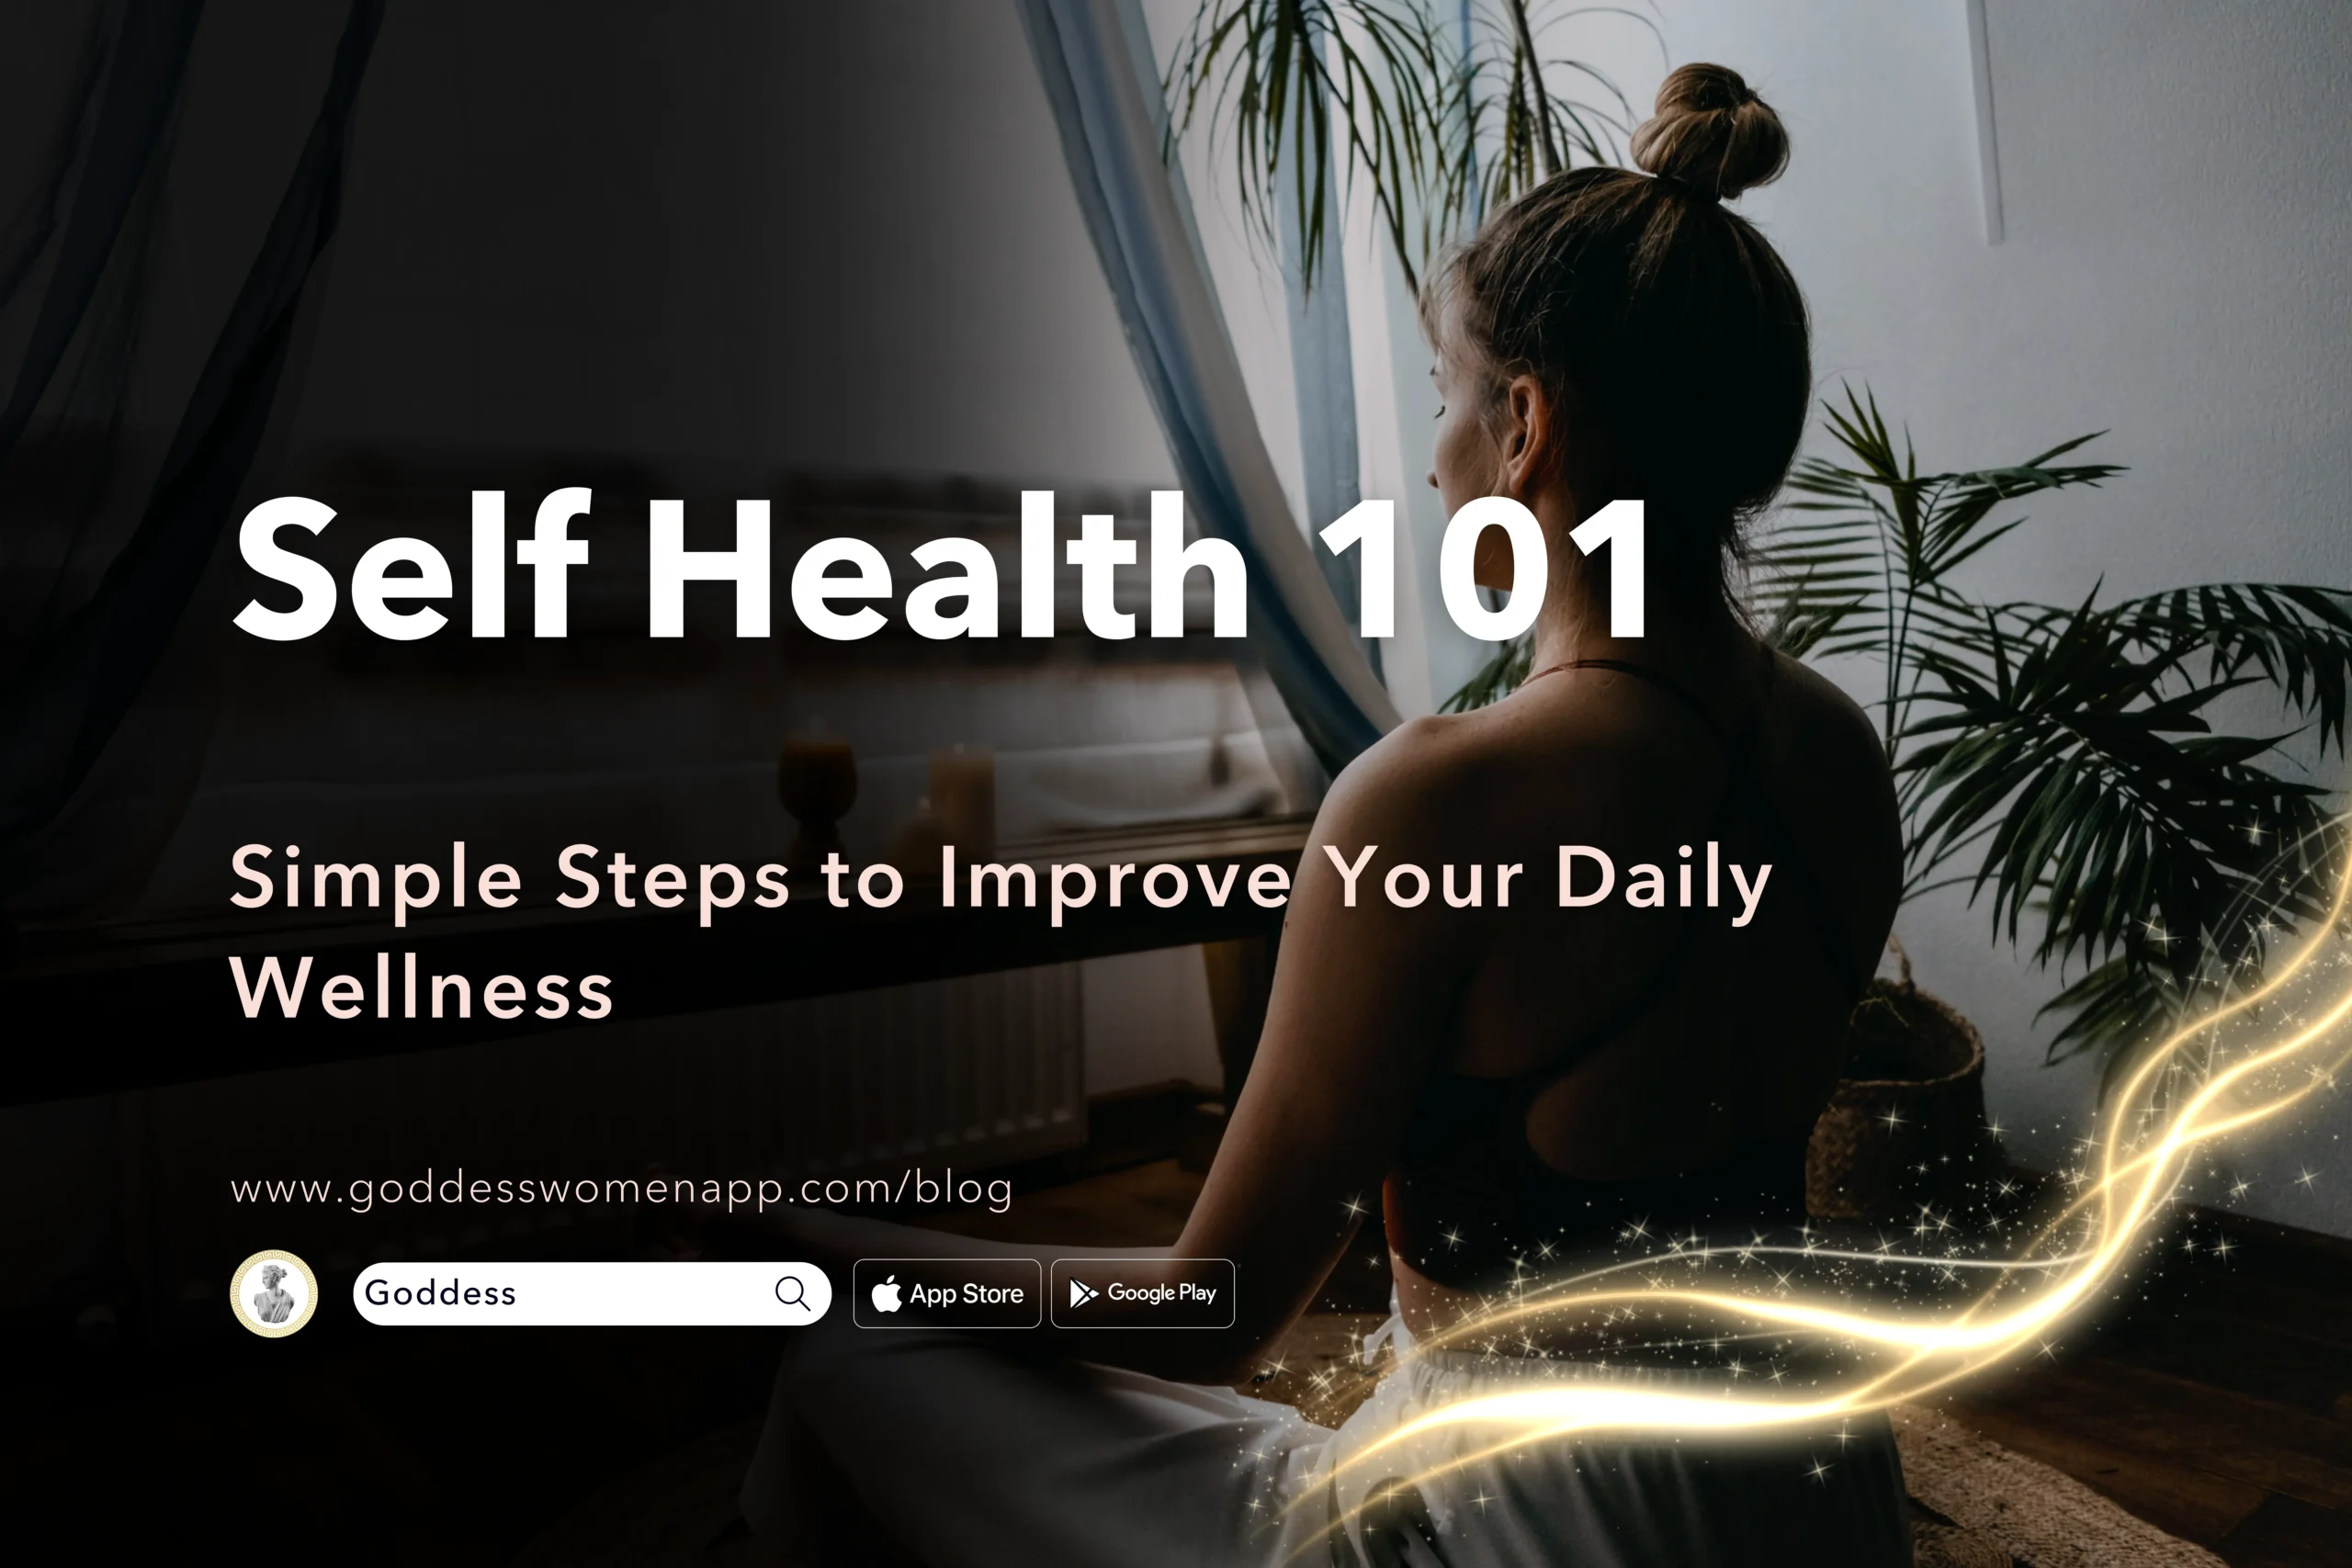 Self Health 101: Simple Steps to Improve Your Daily Wellness